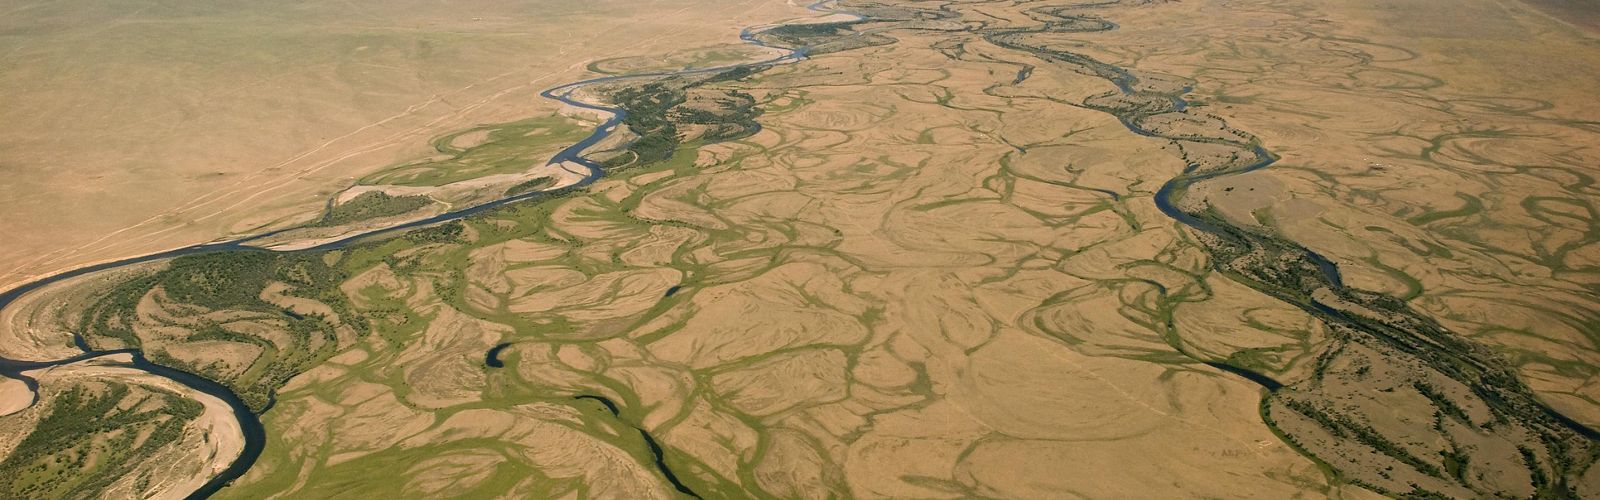 aerial view of brown and green grassland with meandering rivers